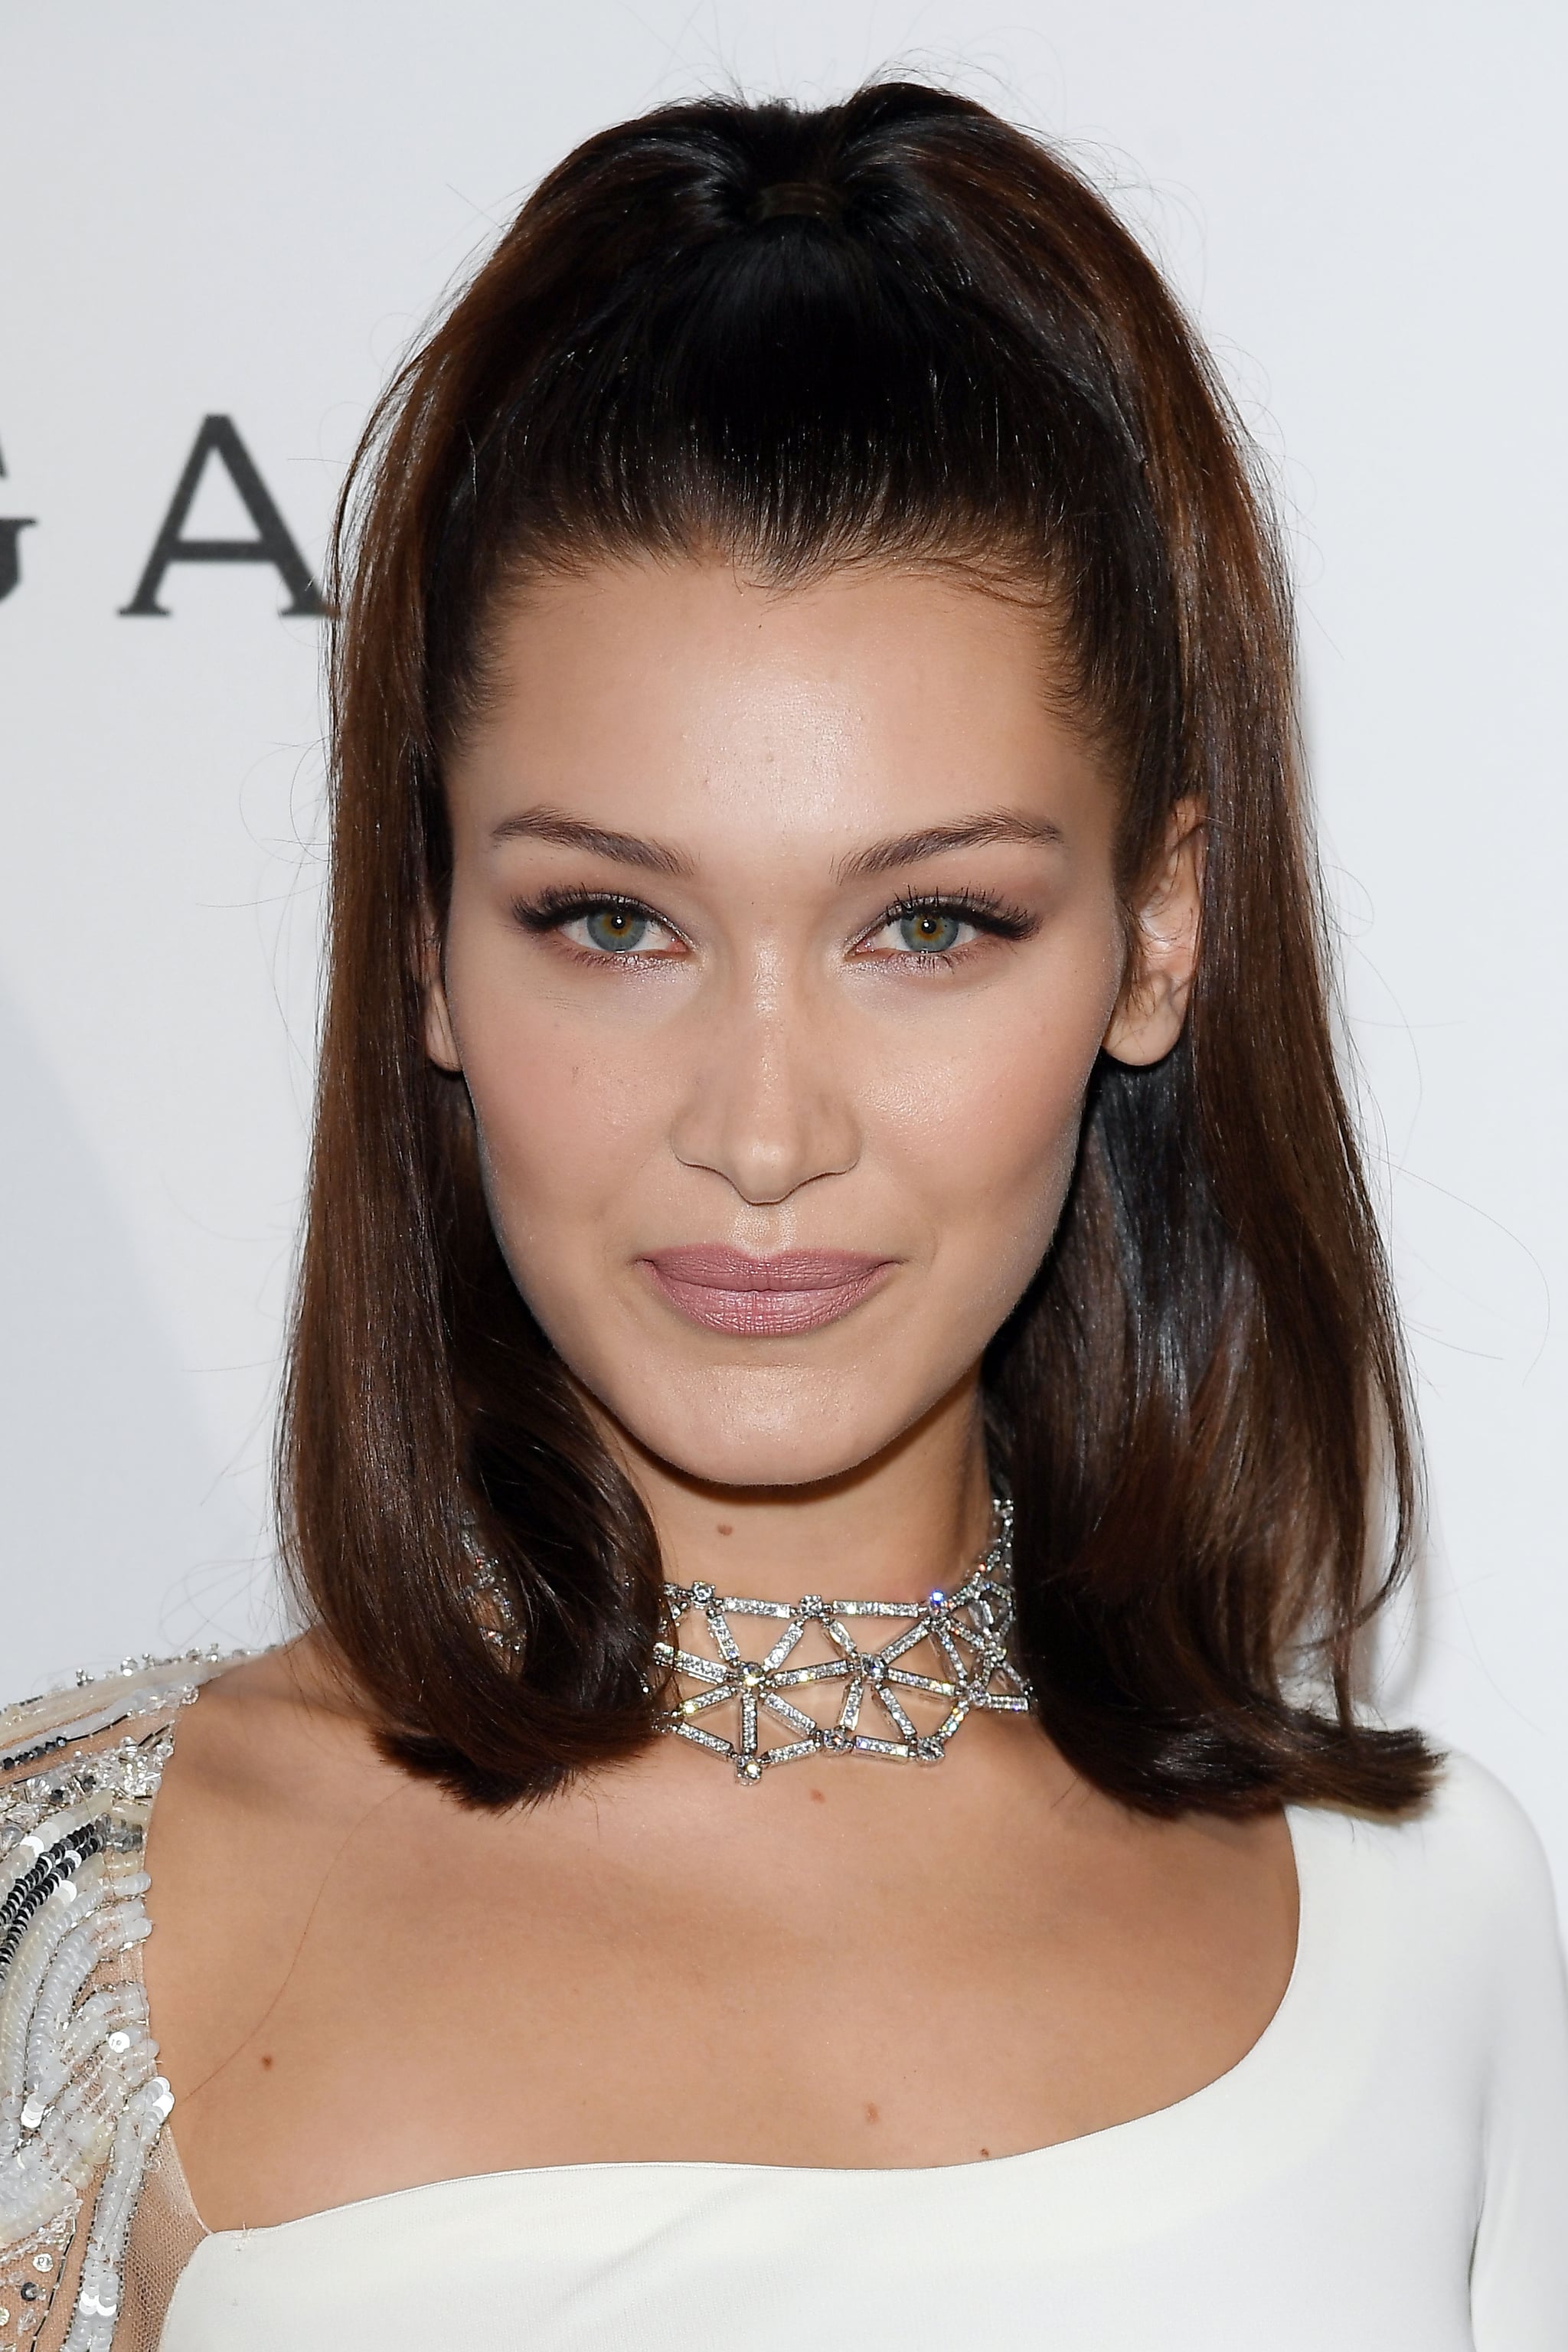 Image of Half up, half down hairstyle for oval oblong face